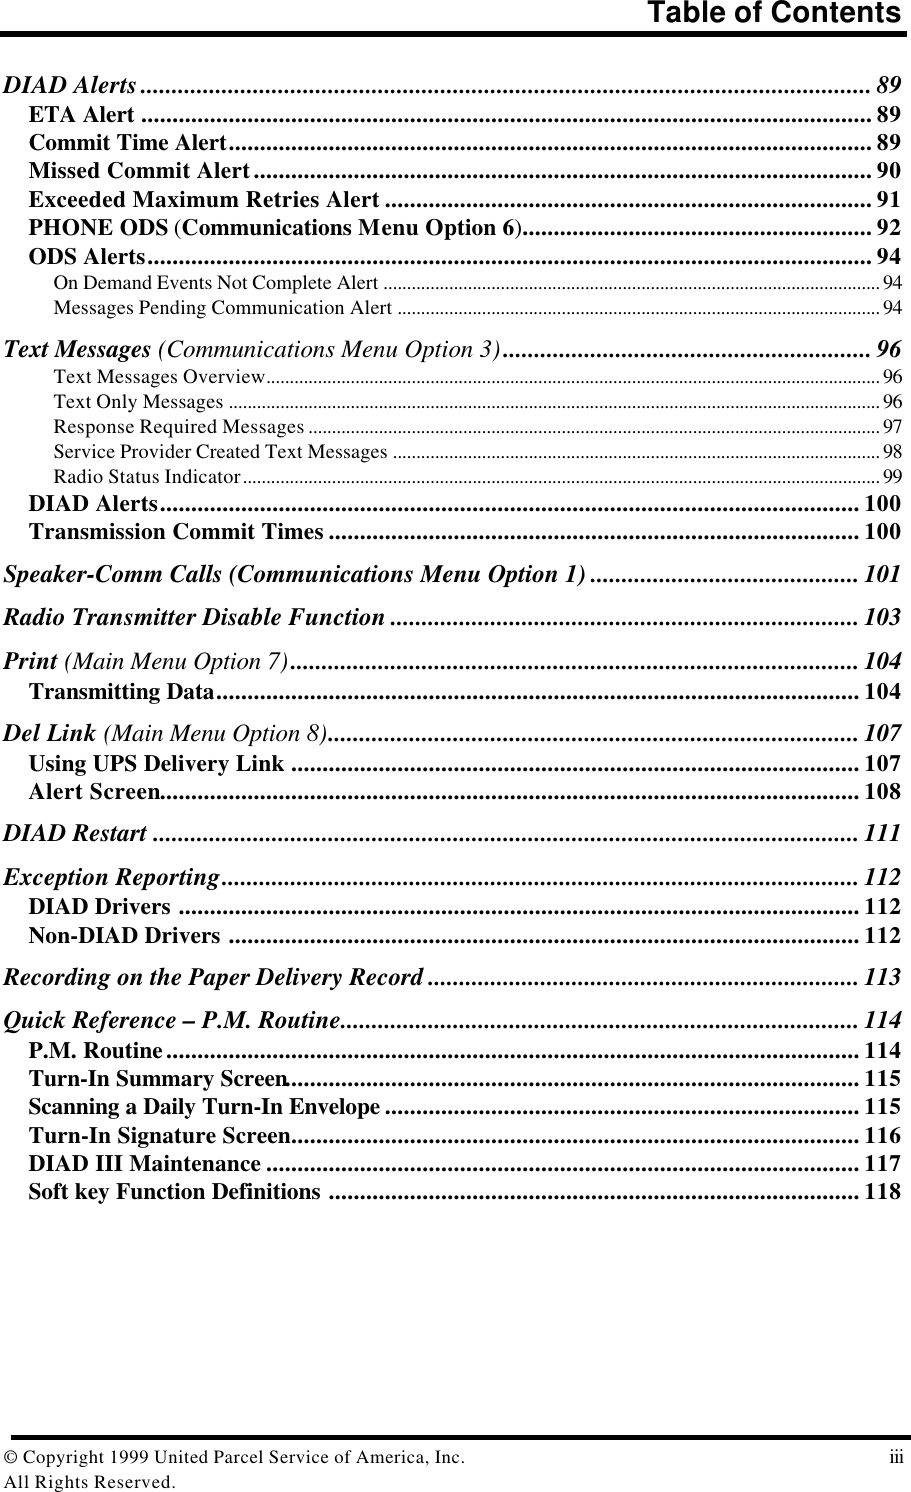 Table of Contents© Copyright 1999 United Parcel Service of America, Inc.  iiiAll Rights Reserved.DIAD Alerts..................................................................................................................... 89ETA Alert ..................................................................................................................... 89Commit Time Alert....................................................................................................... 89Missed Commit Alert................................................................................................... 90Exceeded Maximum Retries Alert .............................................................................. 91PHONE ODS (Communications Menu Option 6)........................................................ 92ODS Alerts.................................................................................................................... 94On Demand Events Not Complete Alert .......................................................................................................... 94Messages Pending Communication Alert ....................................................................................................... 94Text Messages (Communications Menu Option 3)........................................................... 96Text Messages Overview................................................................................................................................... 96Text Only Messages ........................................................................................................................................... 96Response Required Messages .......................................................................................................................... 97Service Provider Created Text Messages ........................................................................................................ 98Radio Status Indicator........................................................................................................................................ 99DIAD Alerts................................................................................................................ 100Transmission Commit Times ..................................................................................... 100Speaker-Comm Calls (Communications Menu Option 1) ........................................... 101Radio Transmitter Disable Function ........................................................................... 103Print (Main Menu Option 7)........................................................................................... 104Transmitting Data....................................................................................................... 104Del Link (Main Menu Option 8)..................................................................................... 107Using UPS Delivery Link ........................................................................................... 107Alert Screen................................................................................................................ 108DIAD Restart ................................................................................................................. 111Exception Reporting...................................................................................................... 112DIAD Drivers ............................................................................................................. 112Non-DIAD Drivers ..................................................................................................... 112Recording on the Paper Delivery Record ..................................................................... 113Quick Reference – P.M. Routine................................................................................... 114P.M. Routine............................................................................................................... 114Turn-In Summary Screen............................................................................................ 115Scanning a Daily Turn-In Envelope ............................................................................ 115Turn-In Signature Screen........................................................................................... 116DIAD III Maintenance ............................................................................................... 117Soft key Function Definitions ..................................................................................... 118